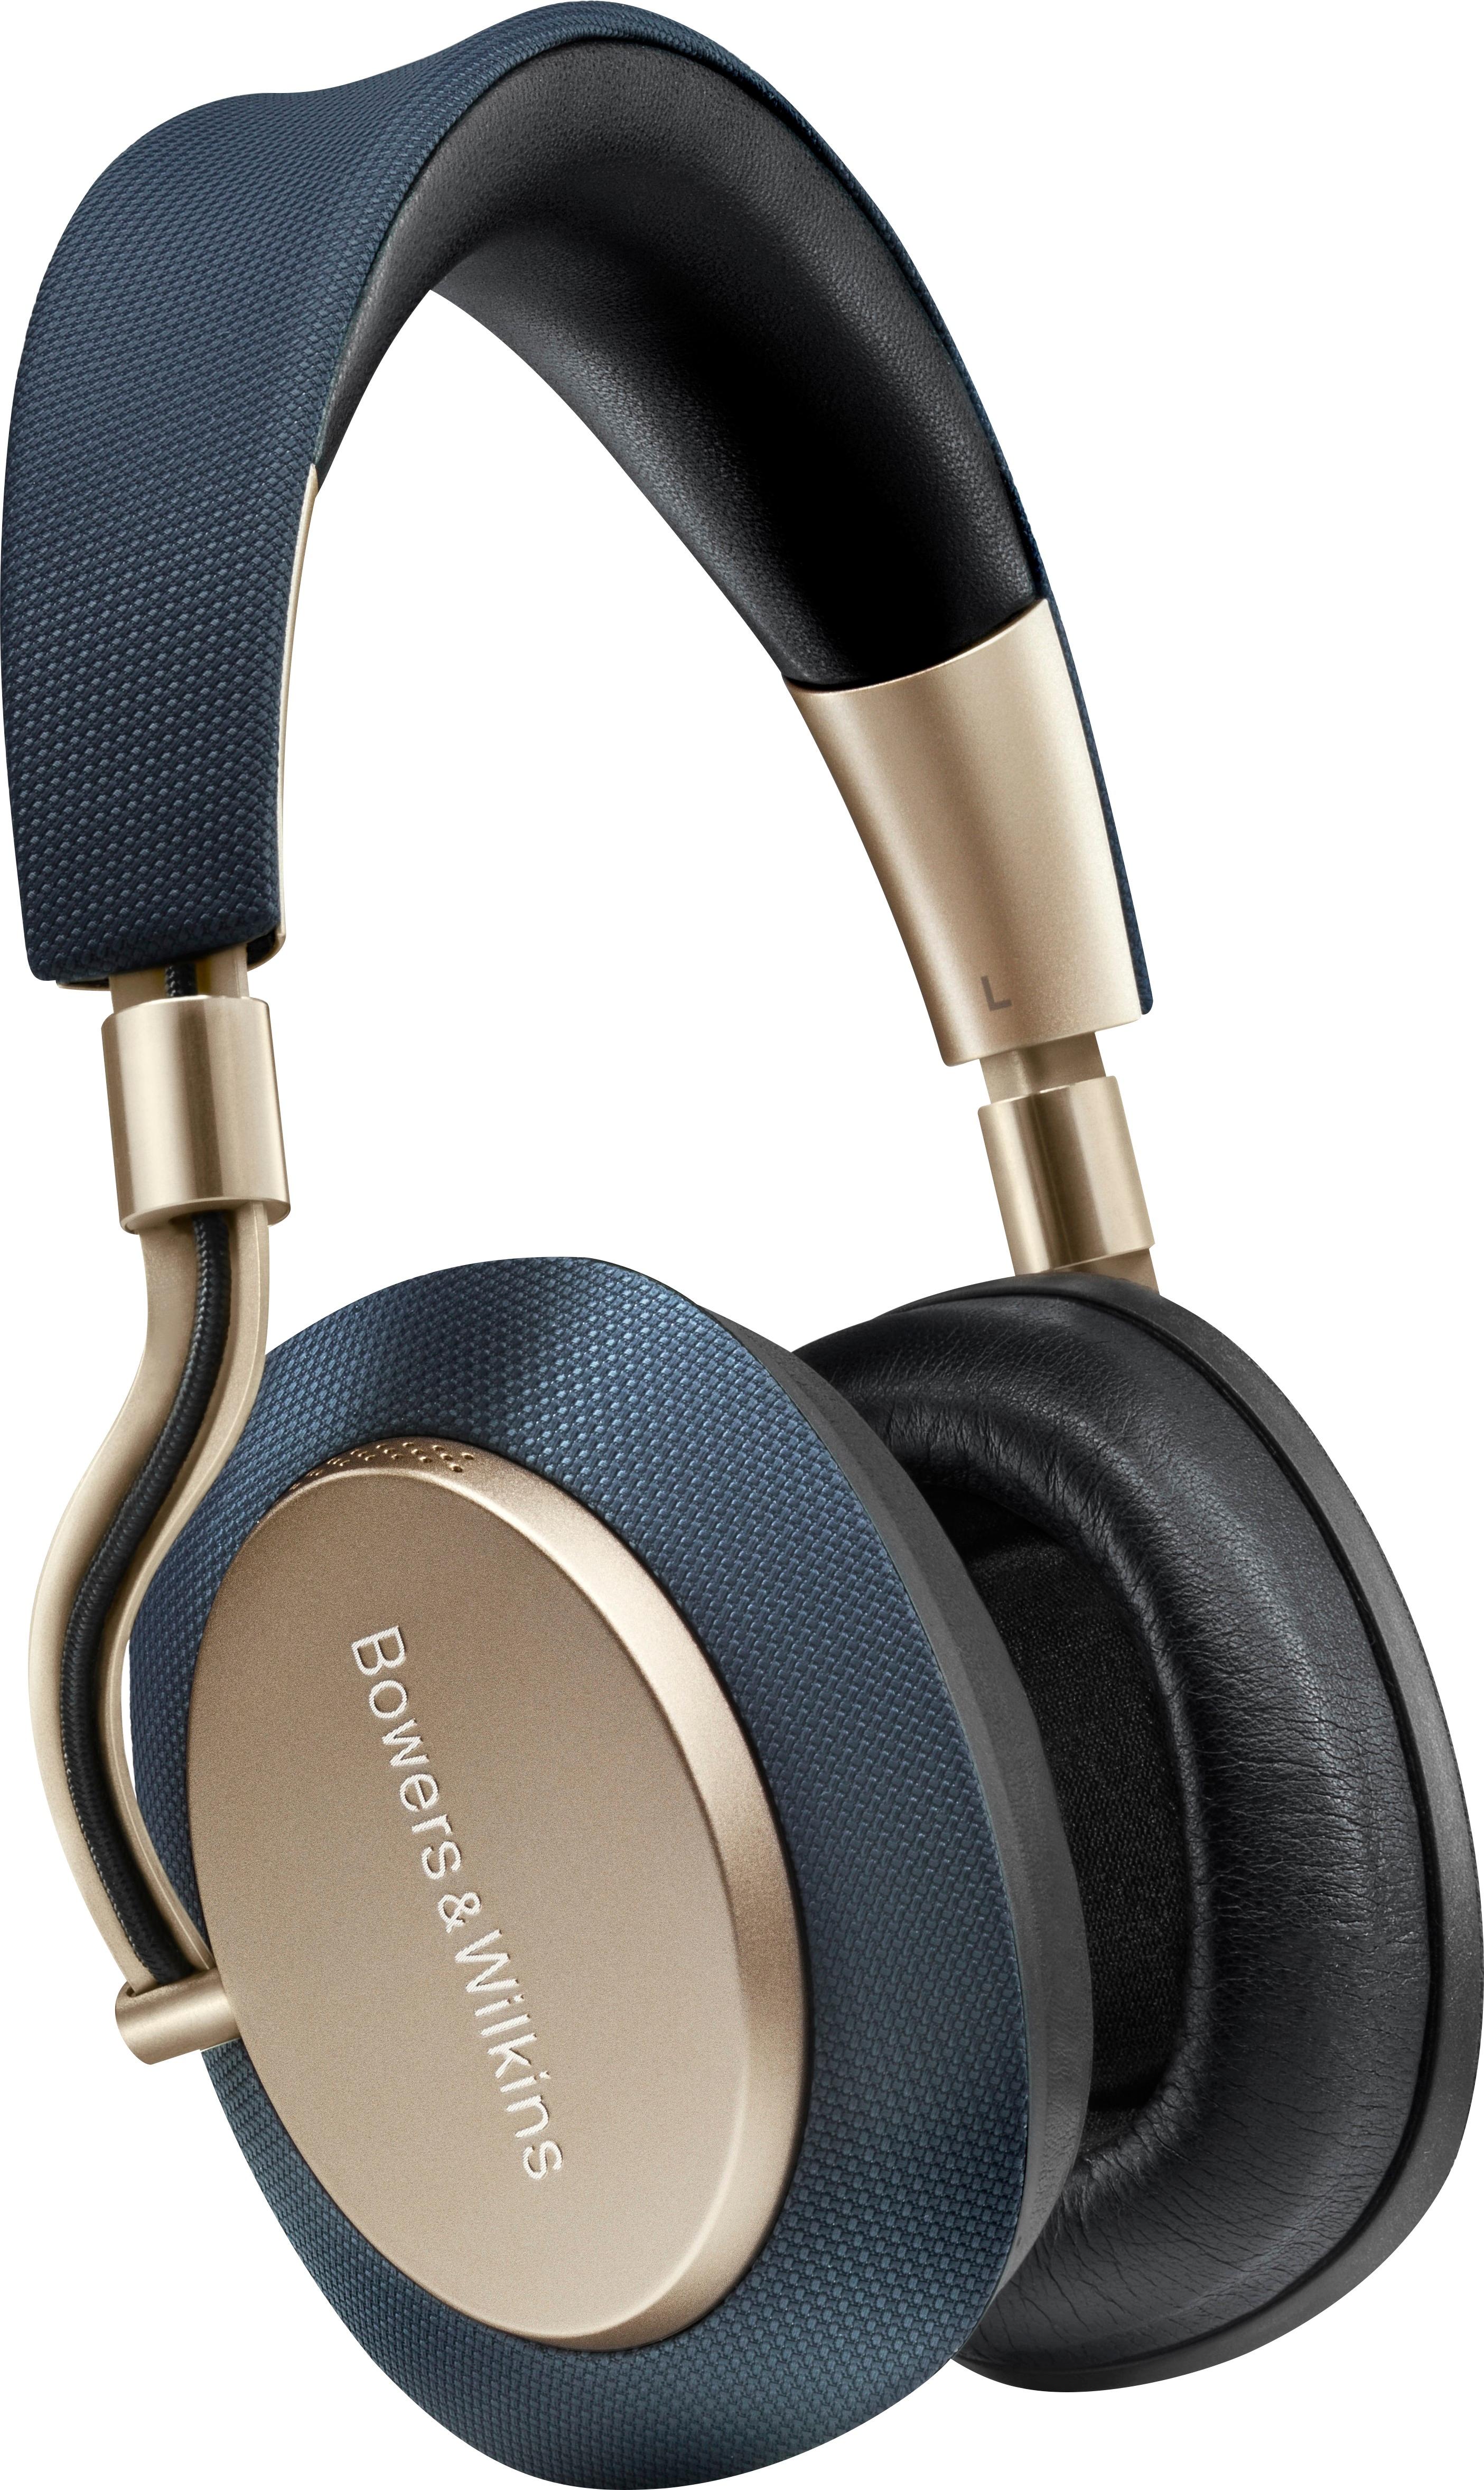 Rent to own Bowers & Wilkins - PX Wireless Noise Cancelling Over-the-Ear Headphones - Soft Gold